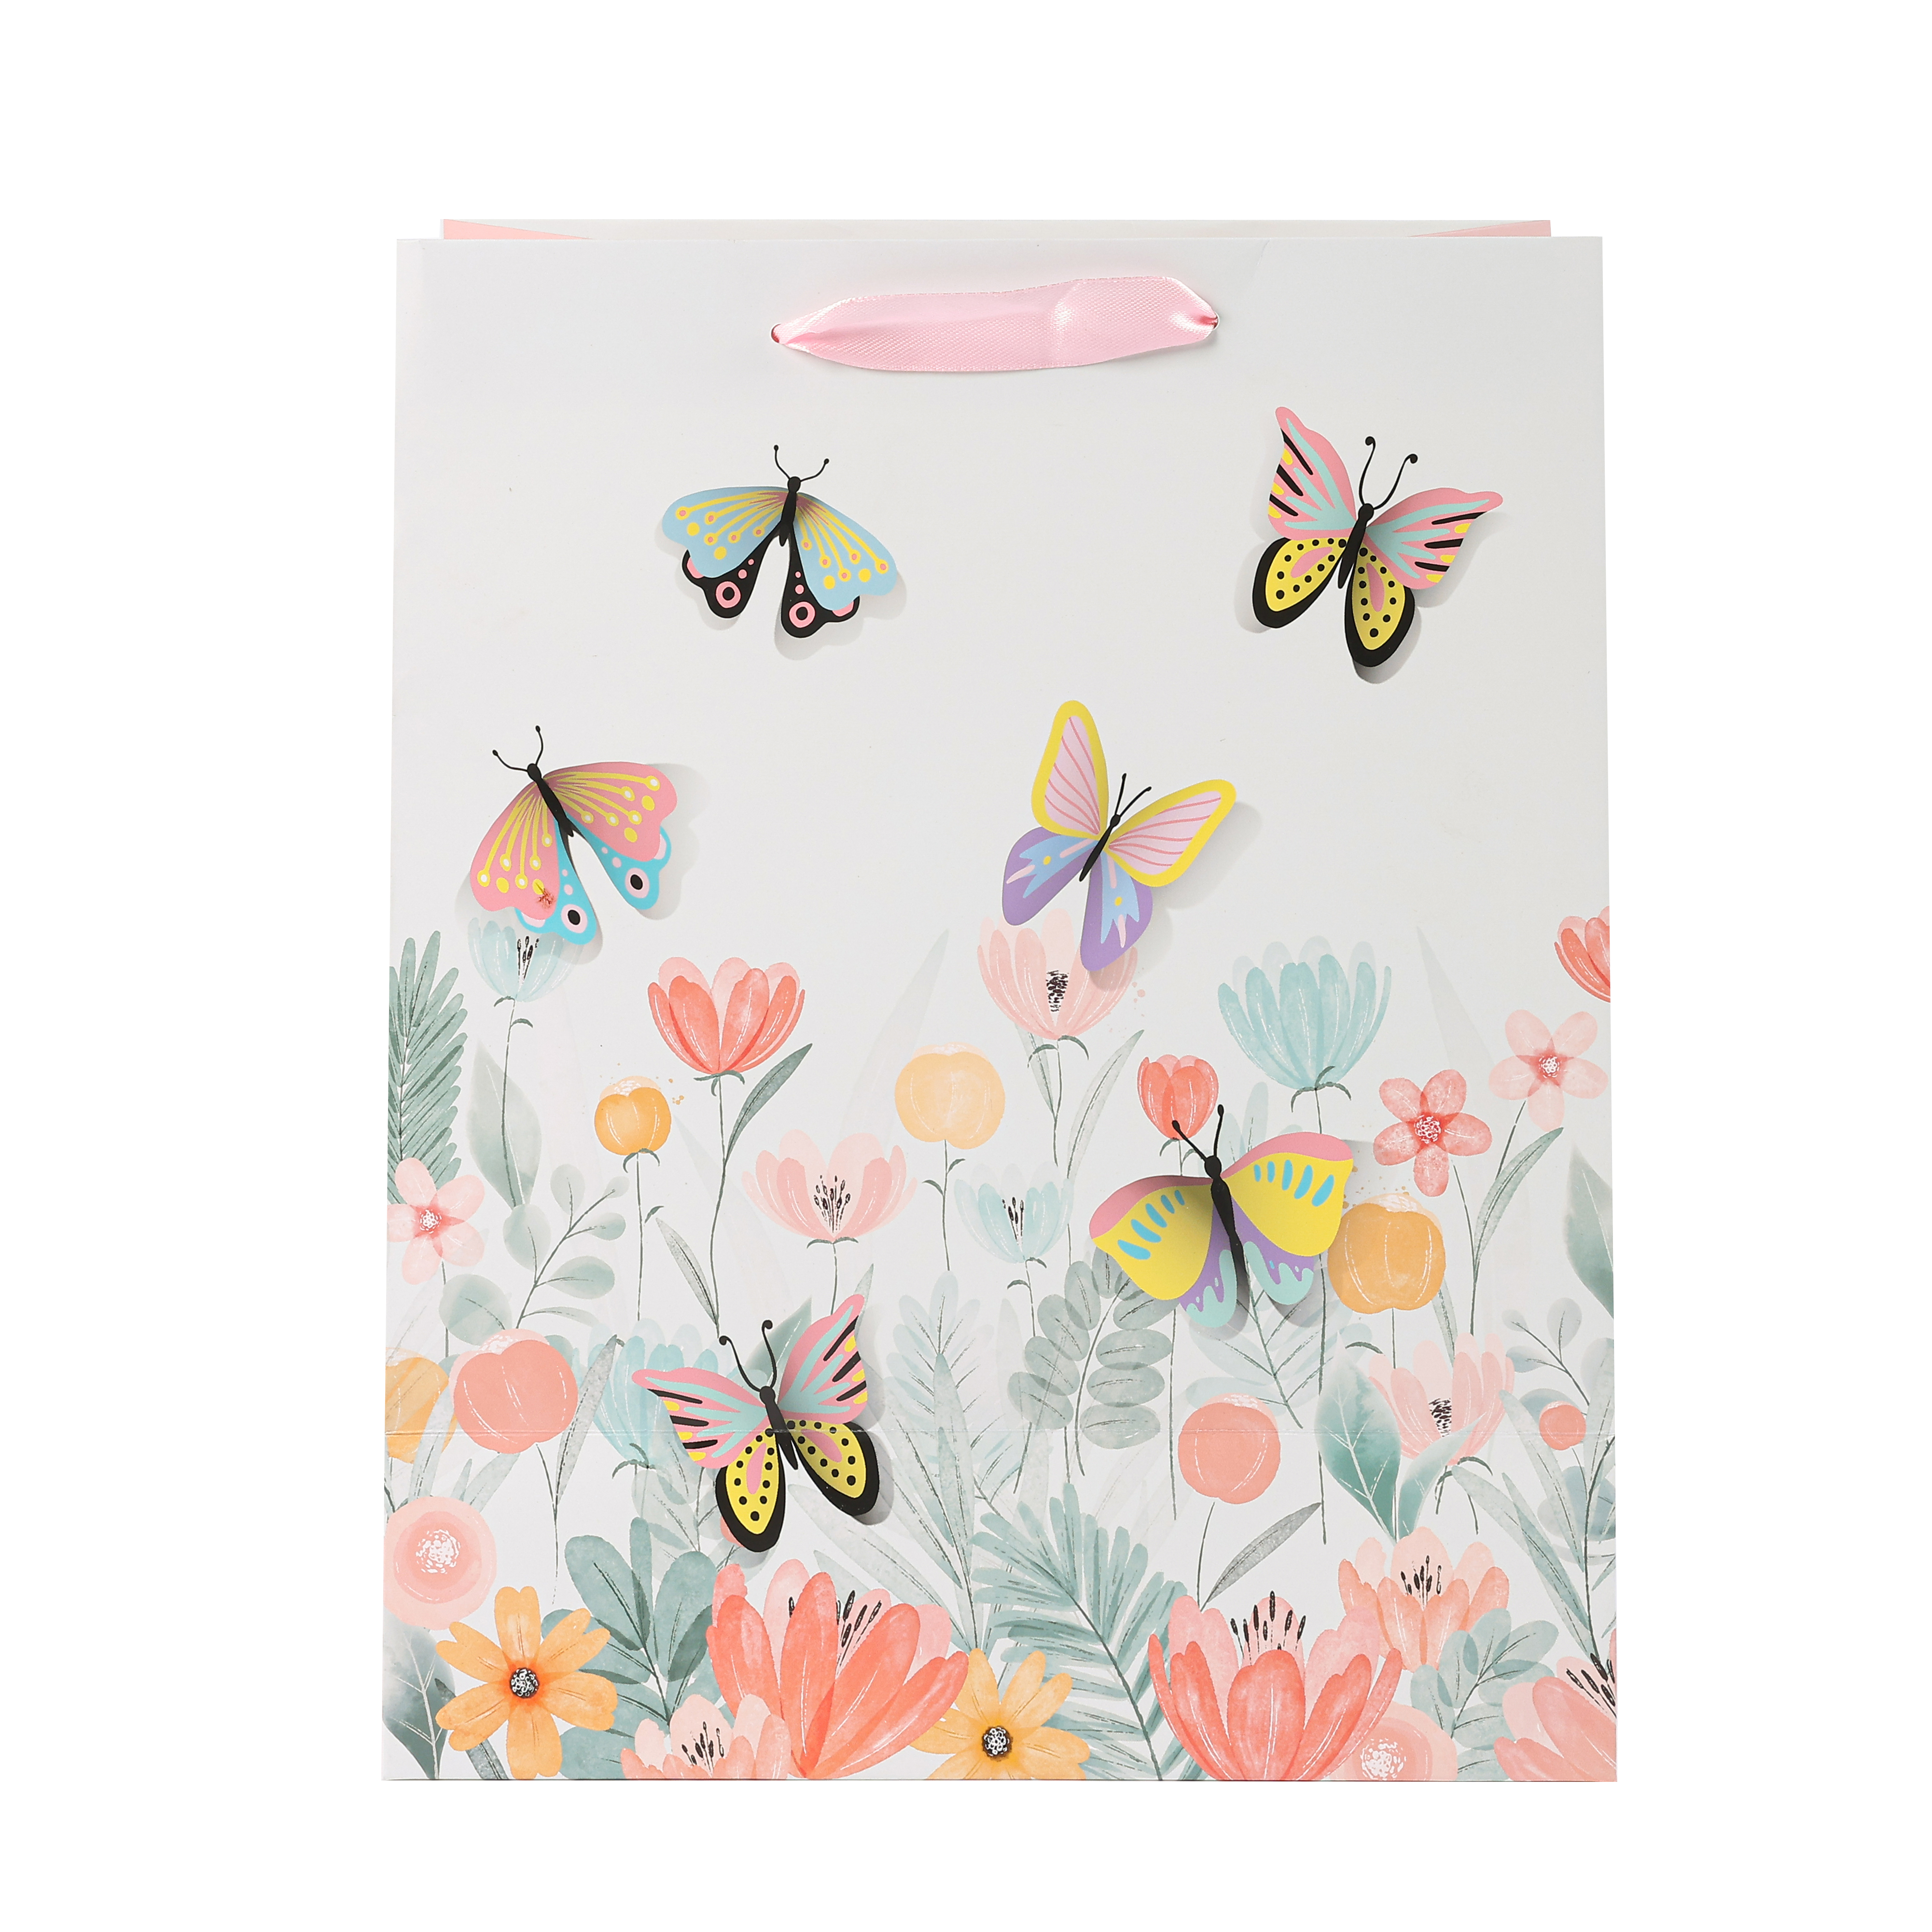 Three-dimensional butterfly flower gift bag KT042